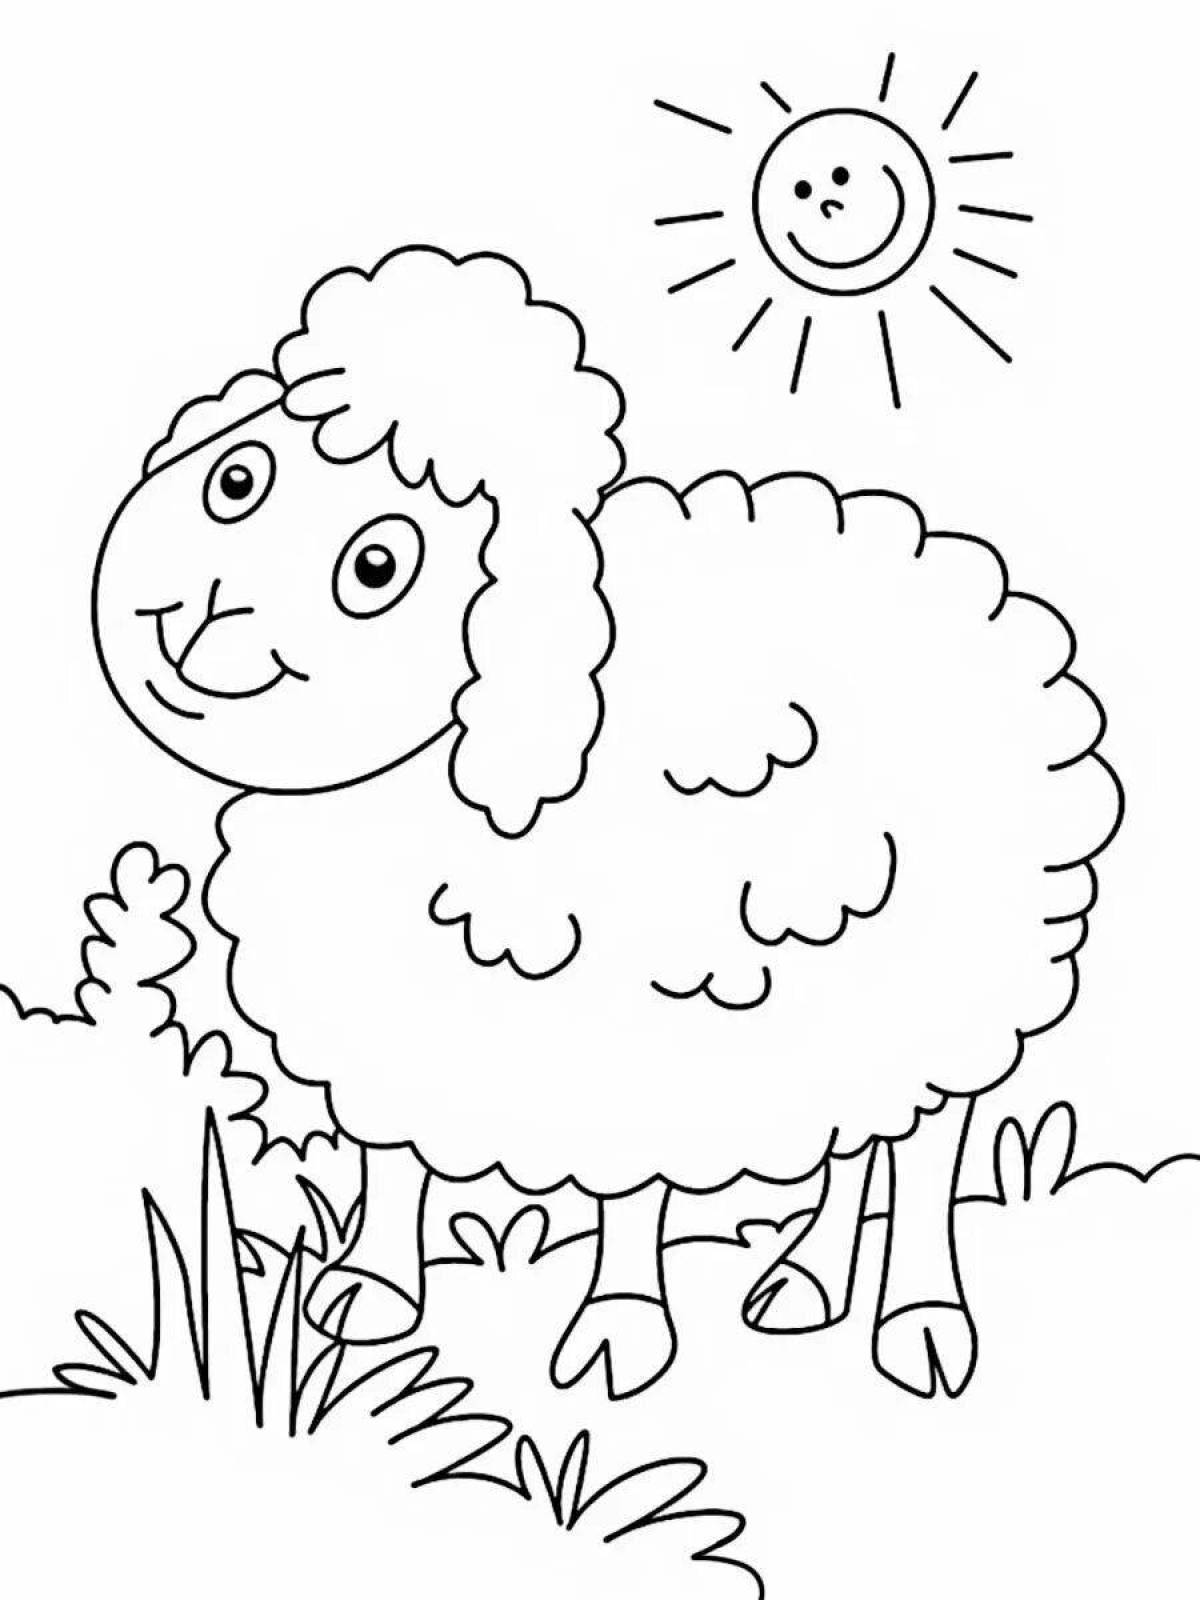 Magic coloring sheep for children 2-3 years old